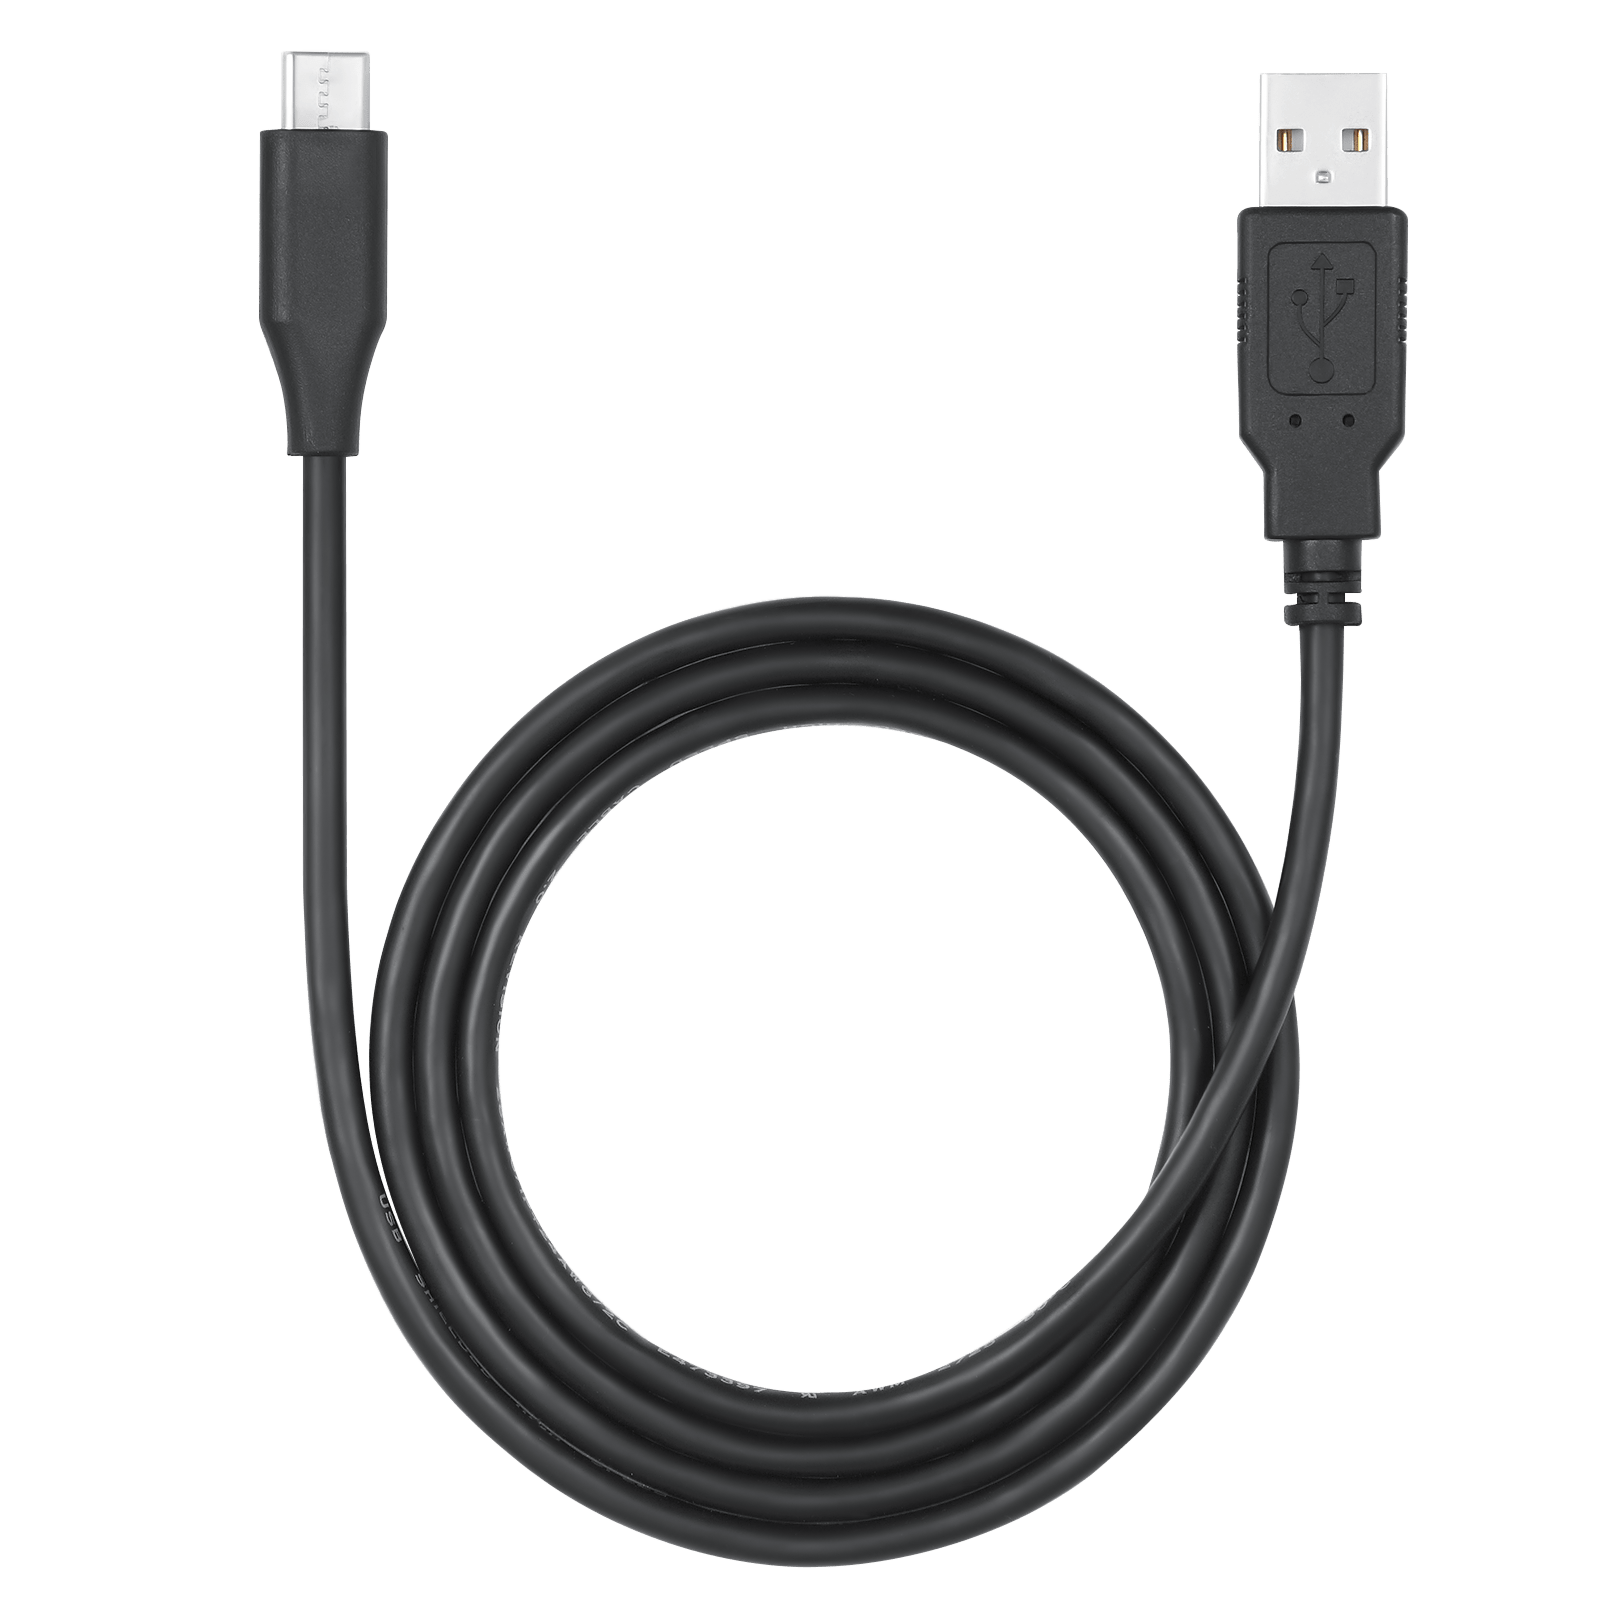 PERIPRO-406 - USB-C to USB-A Cable - Perixx Europe